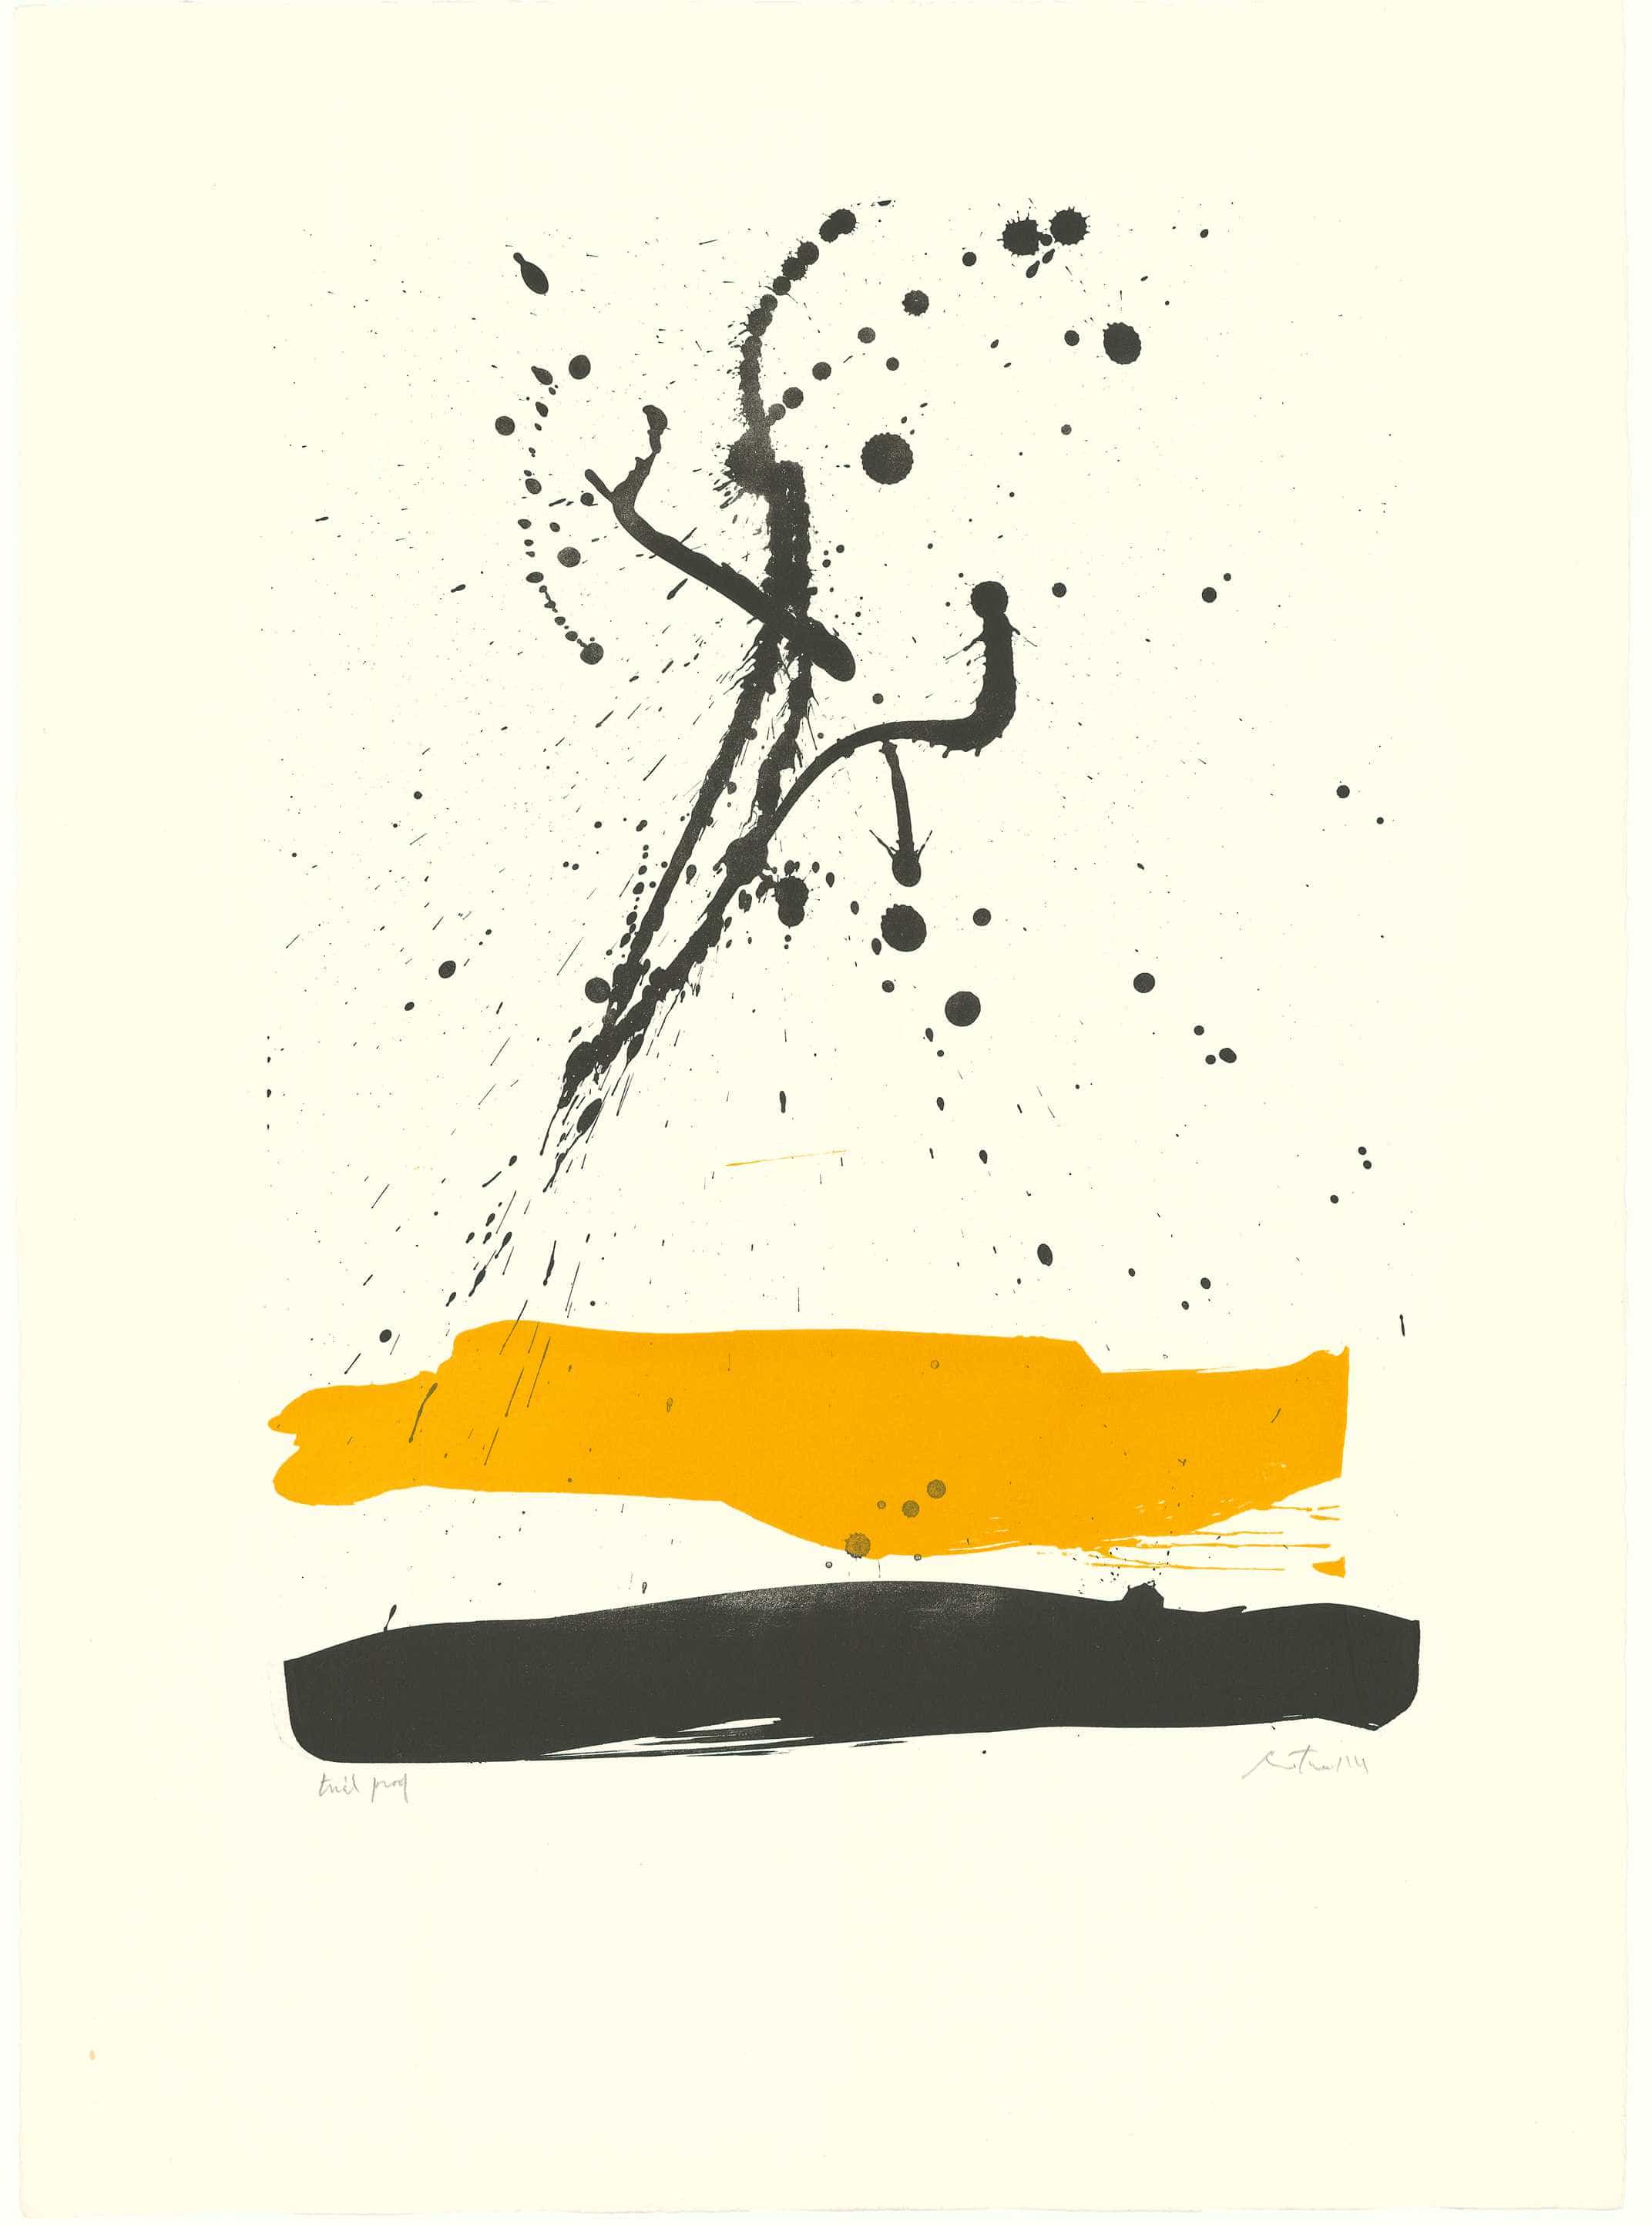 Robert Motherwell, A Throw of the Dice #4, 1963